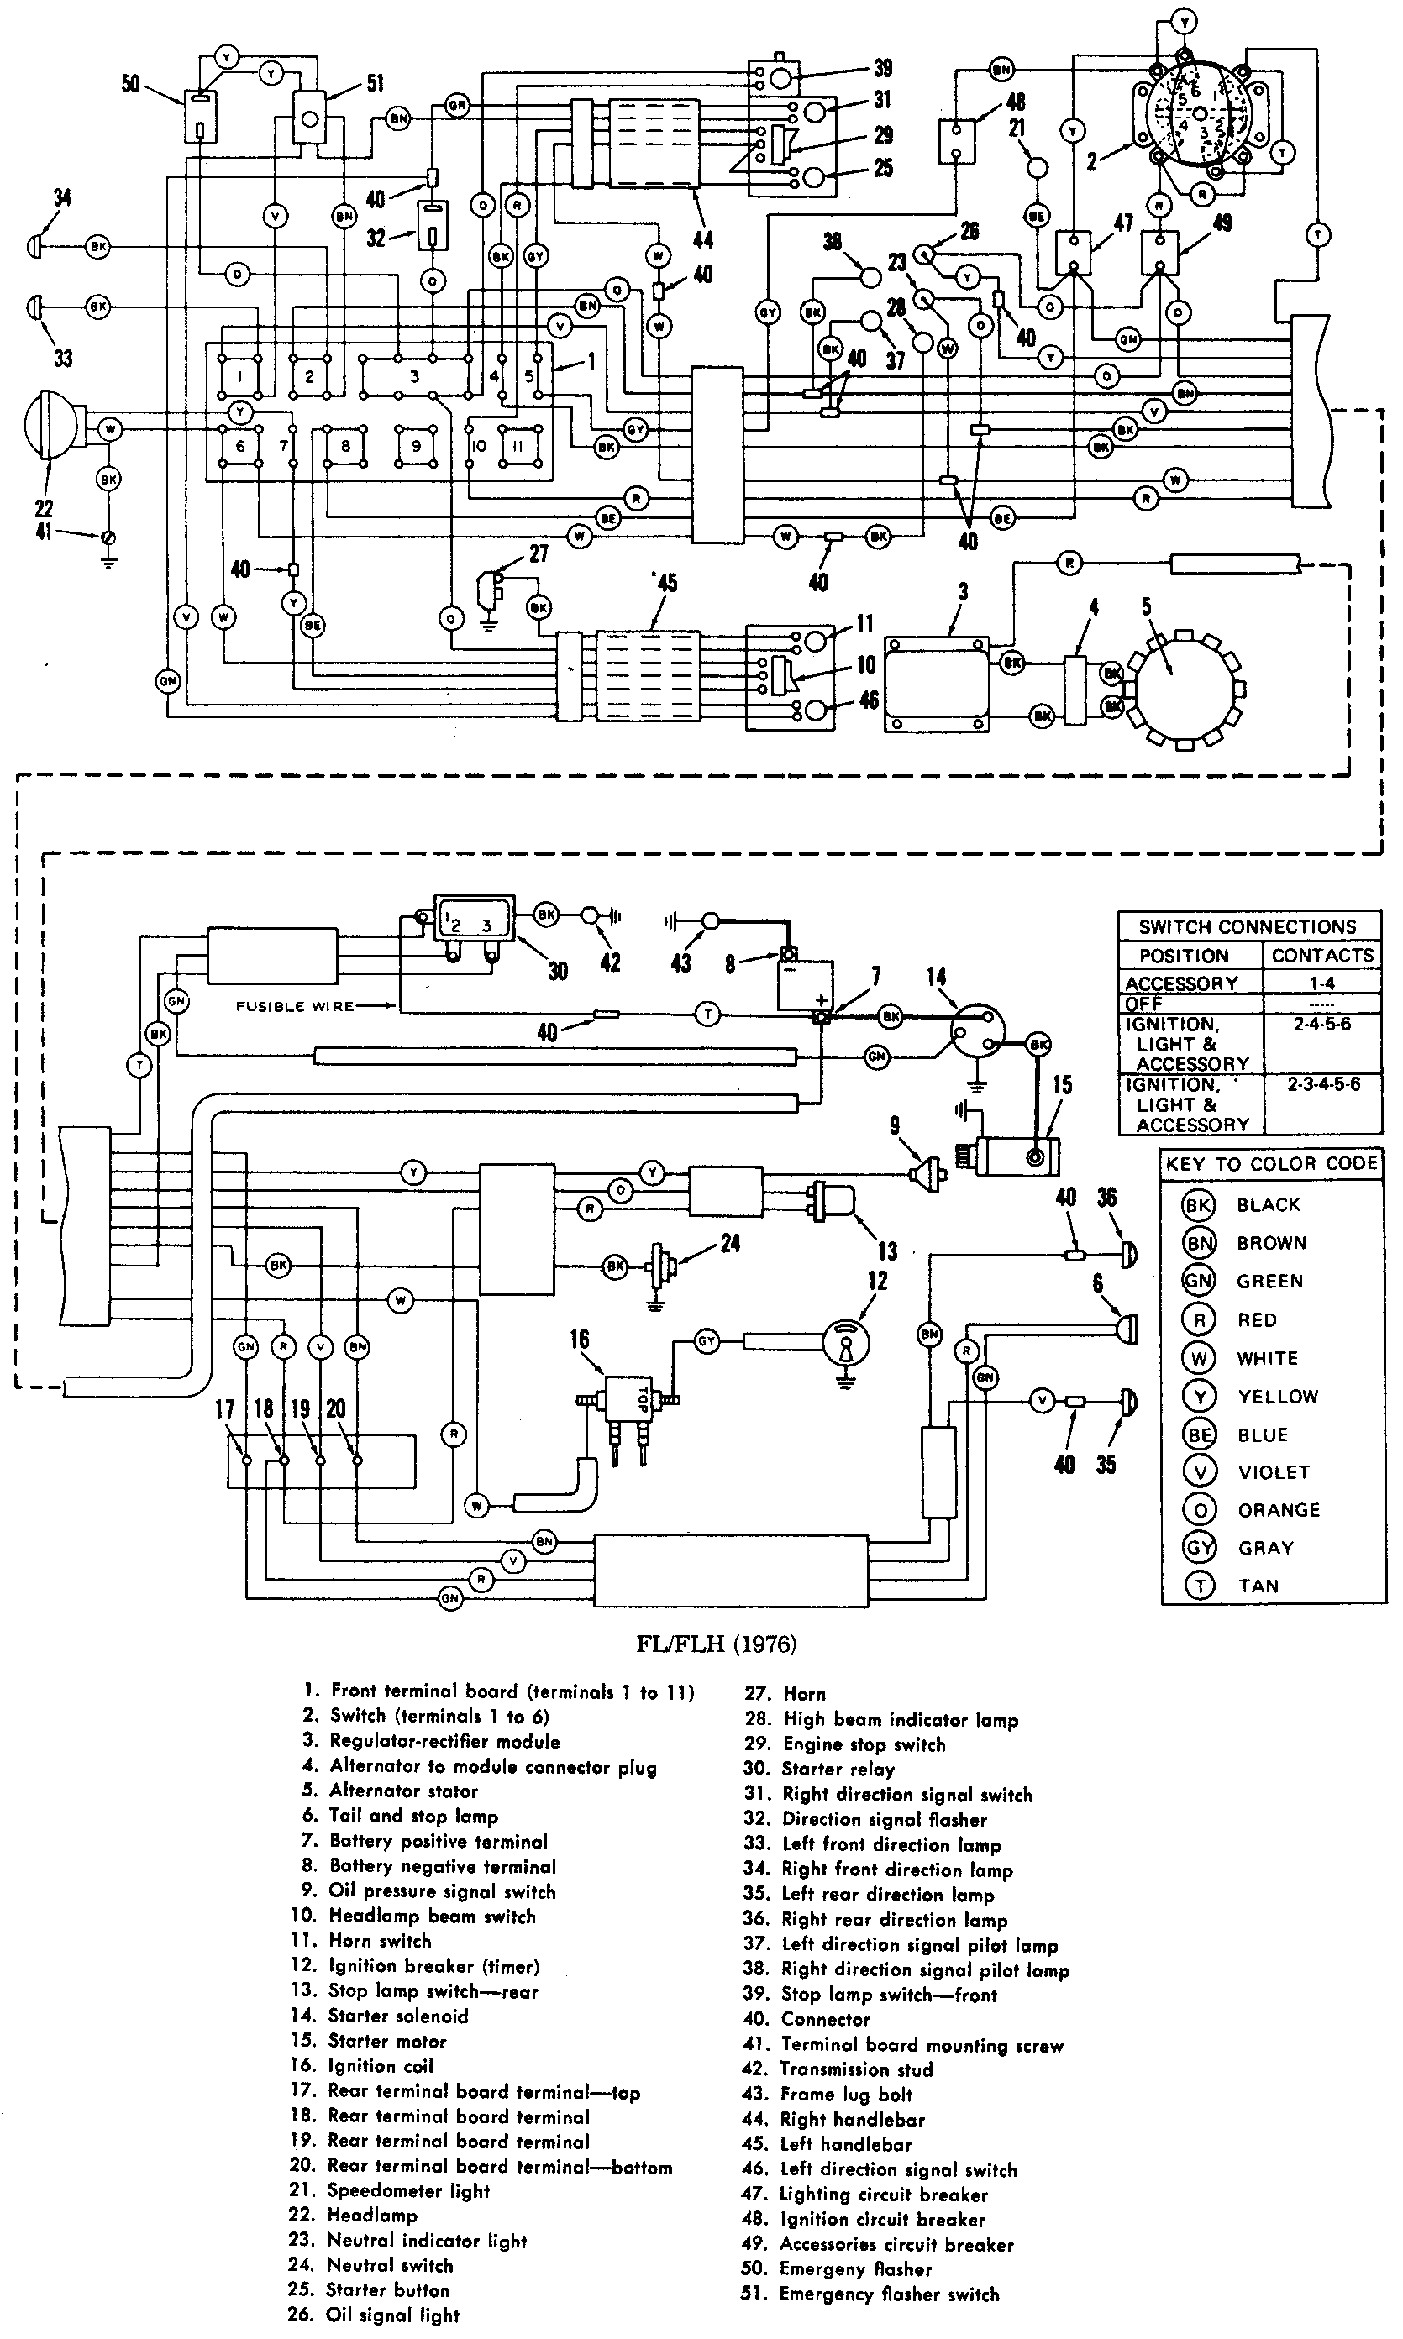 Harley Davidson Radio Wiring Diagram For 0900c bba2 Gif Magnificent Download In